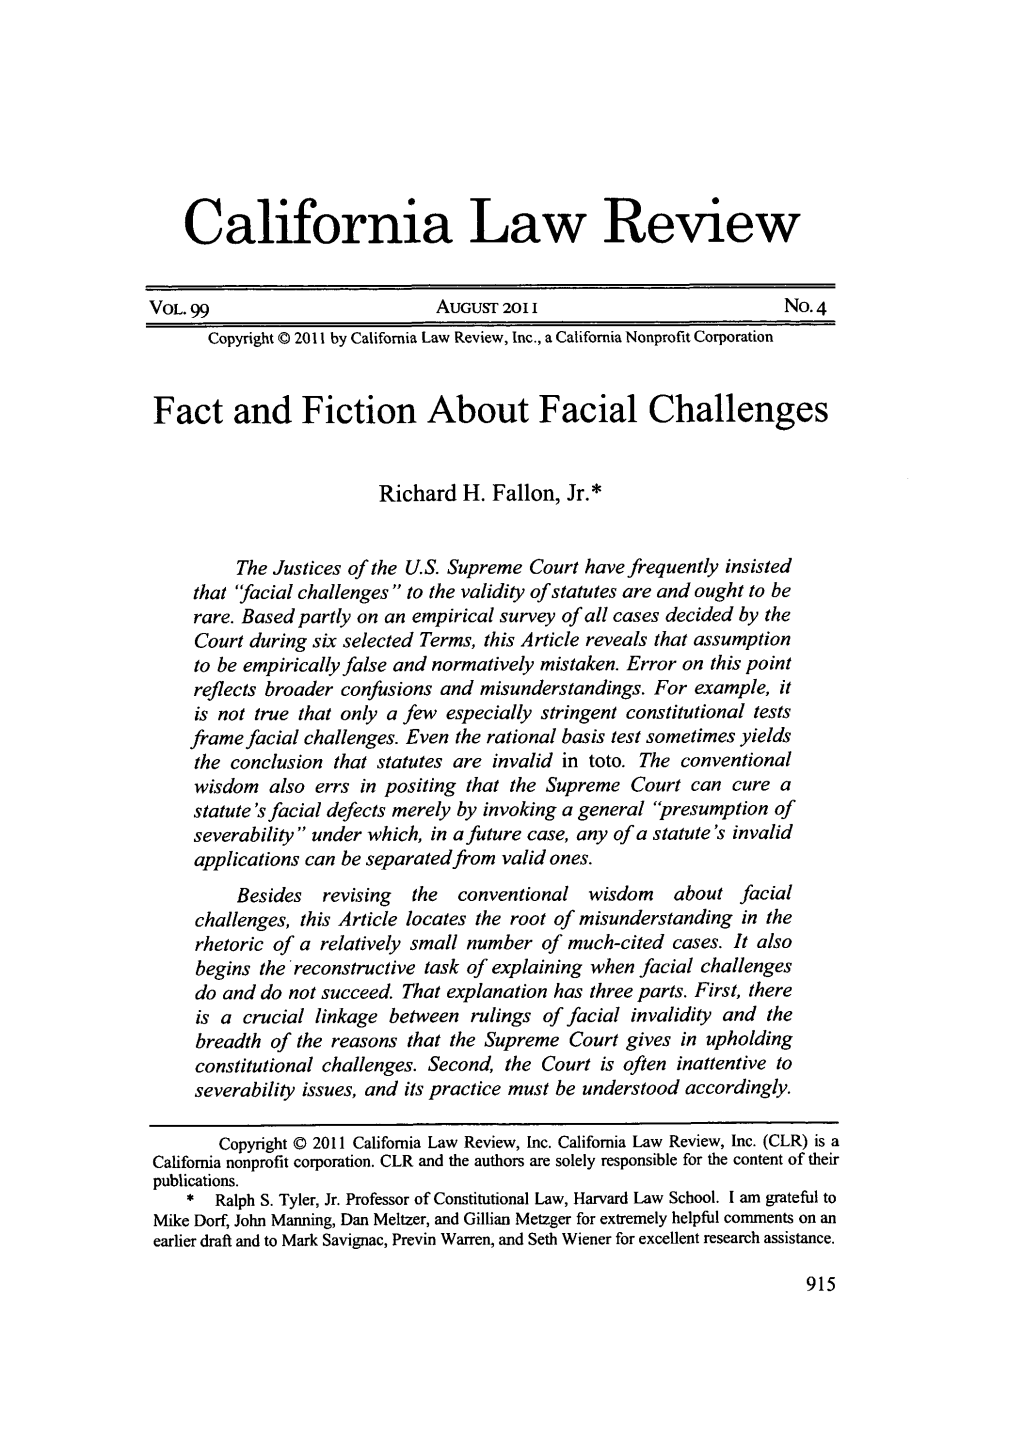 Fact and Fiction About Facial Challenges